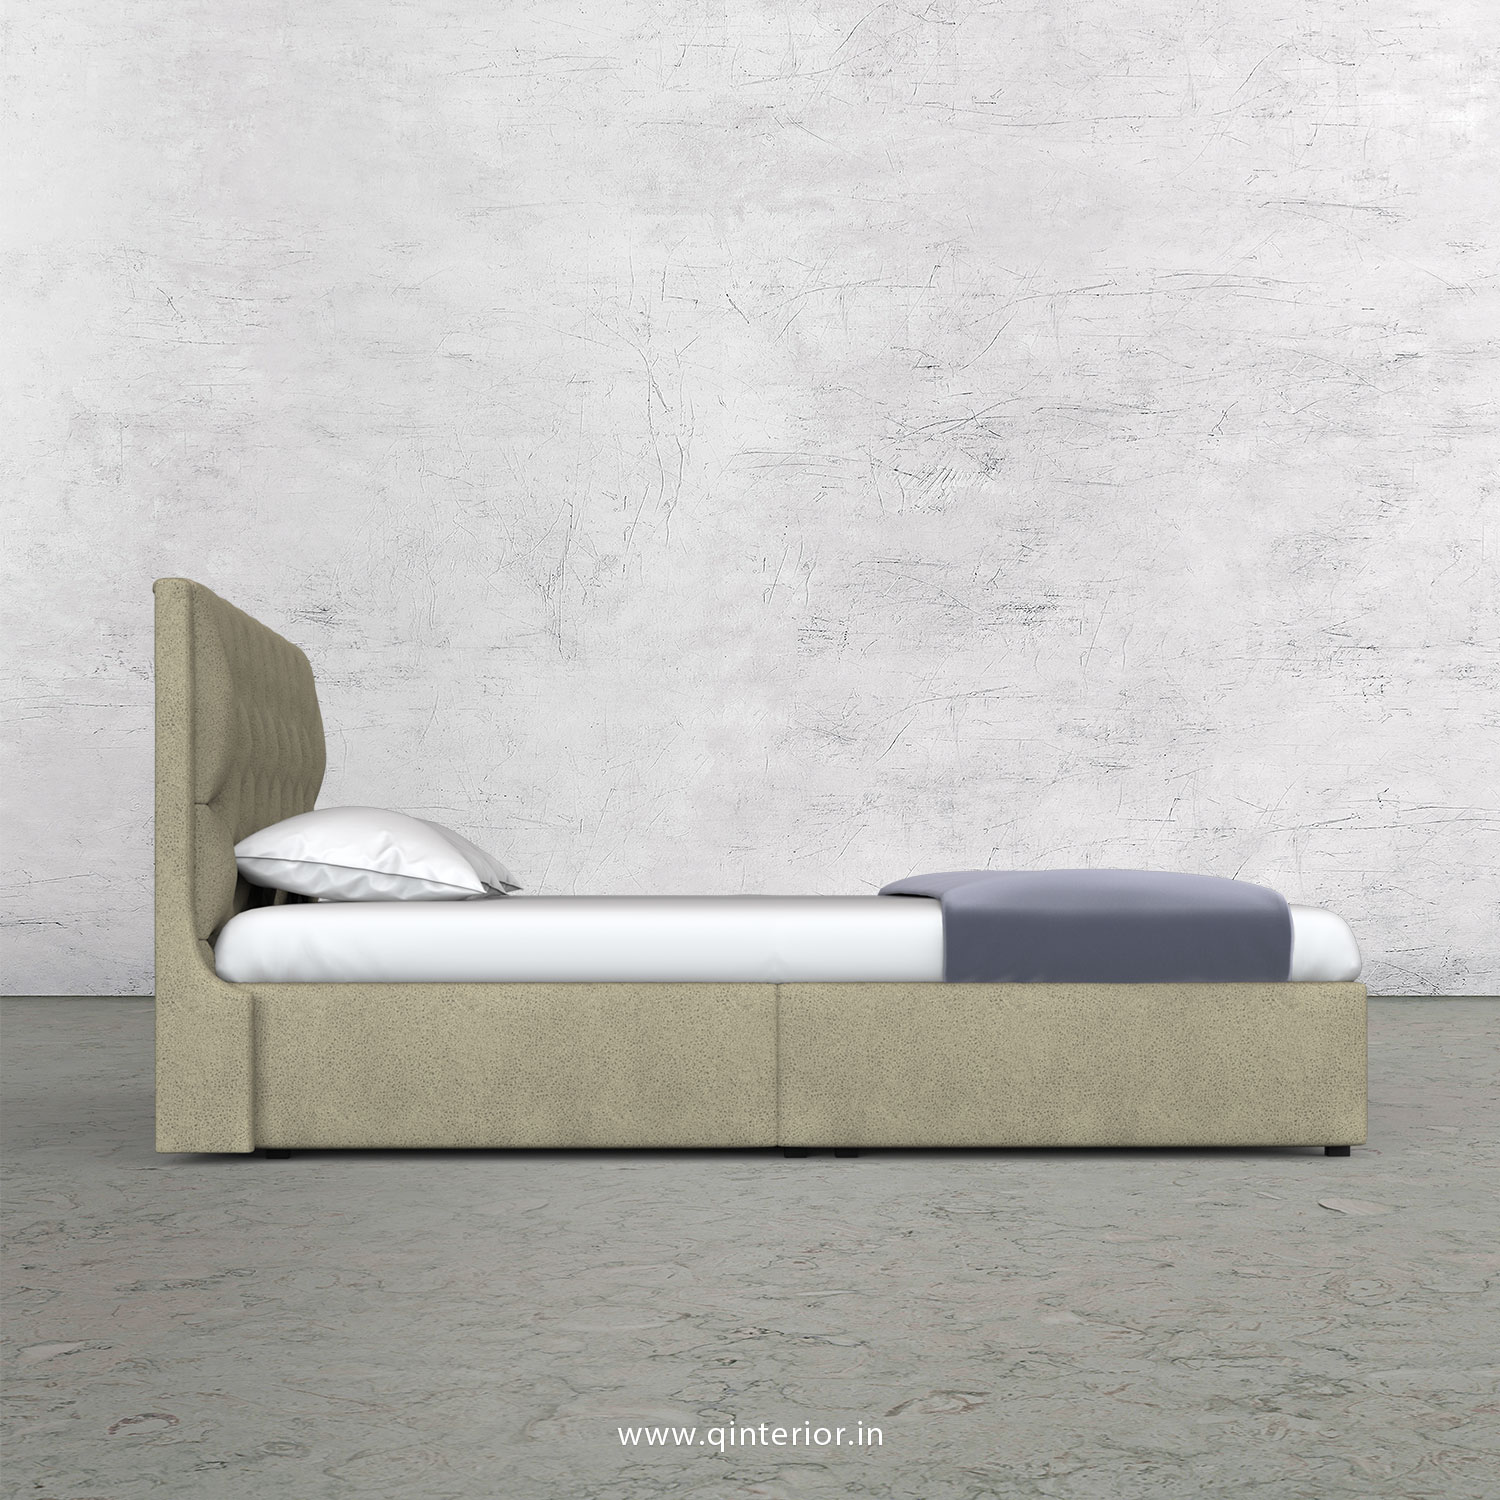 Scorpius Queen Bed in Fab Leather Fabric - QBD009 FL10